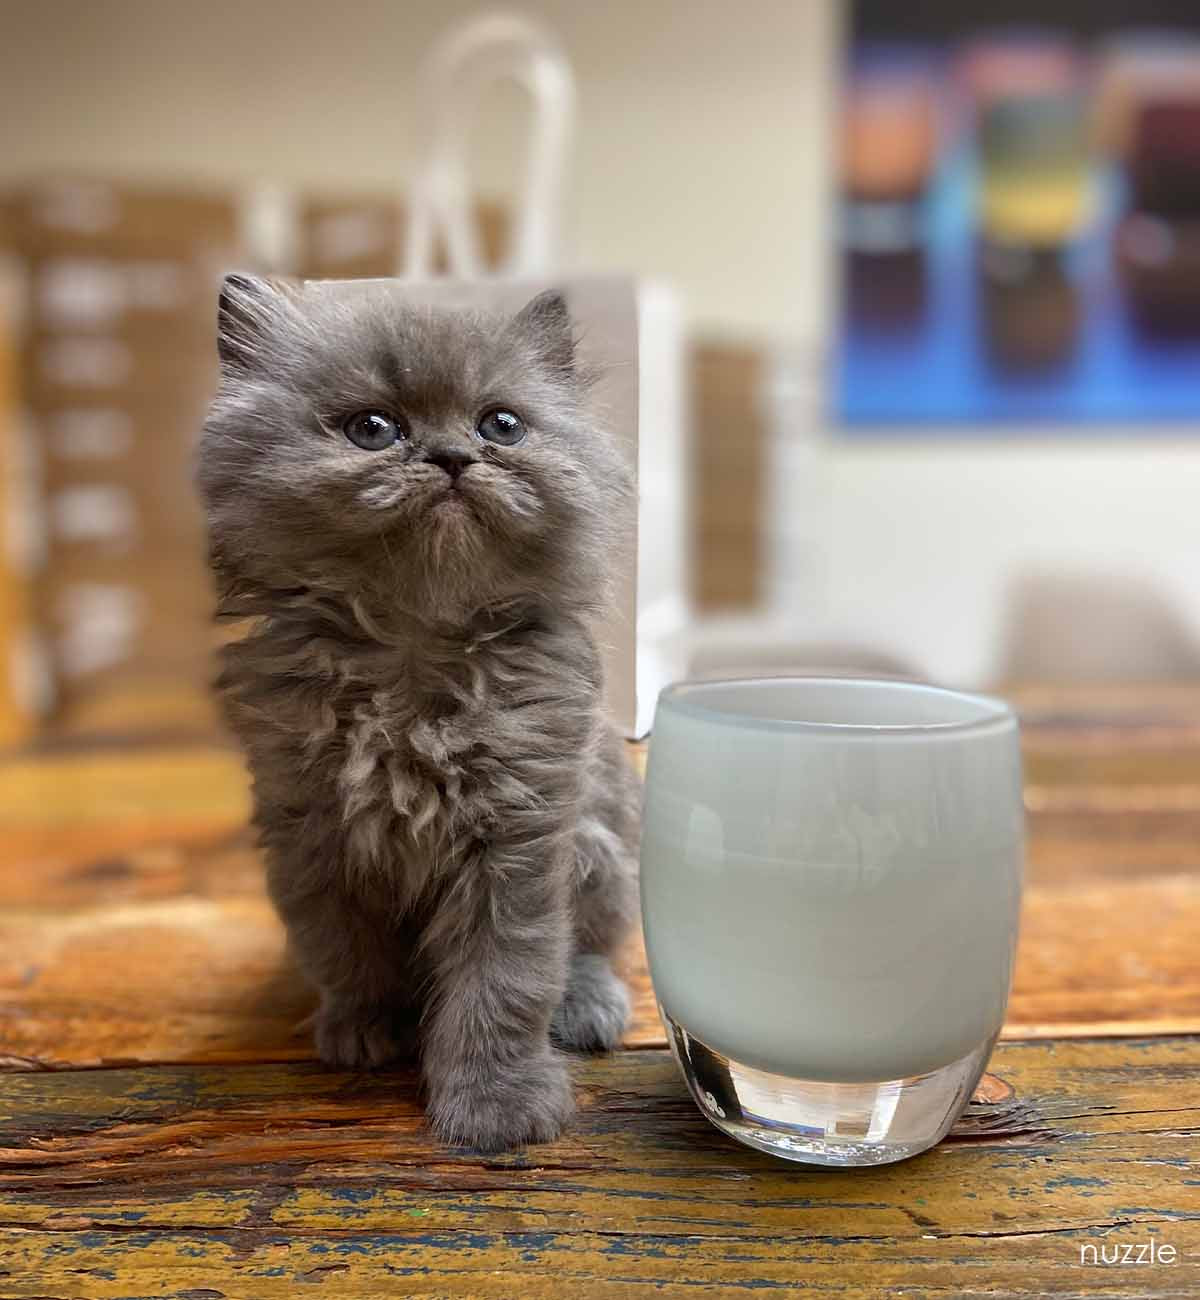 penny a gray blue long haired kitten standing next to nuzzle, a gray hand-blown glass votive candle holder.